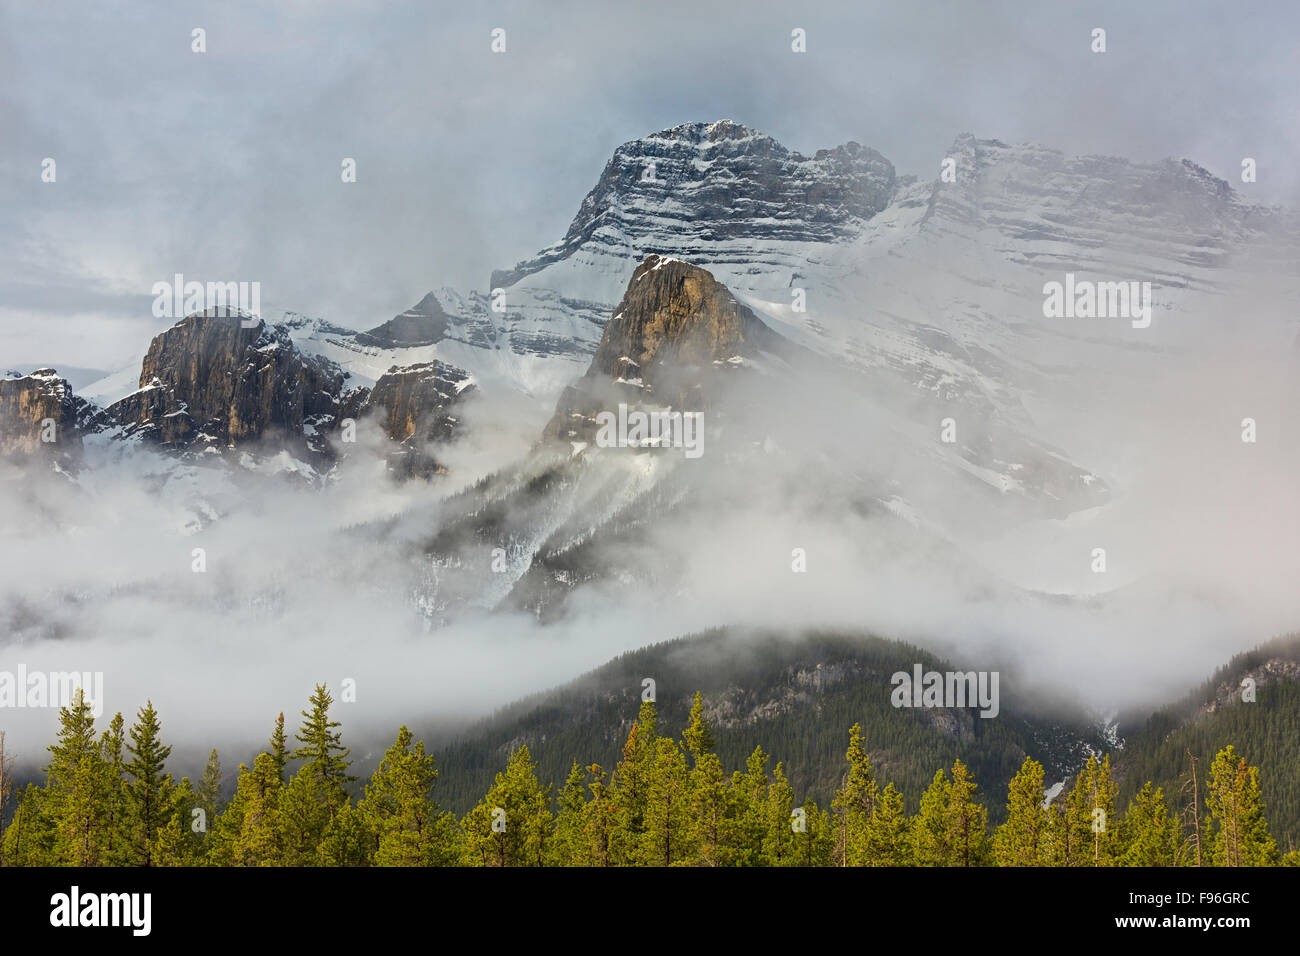 Snow covered and fog shrouded Mount Rundle Mountains, Banff National Park, Alberta, Canada Stock Photo